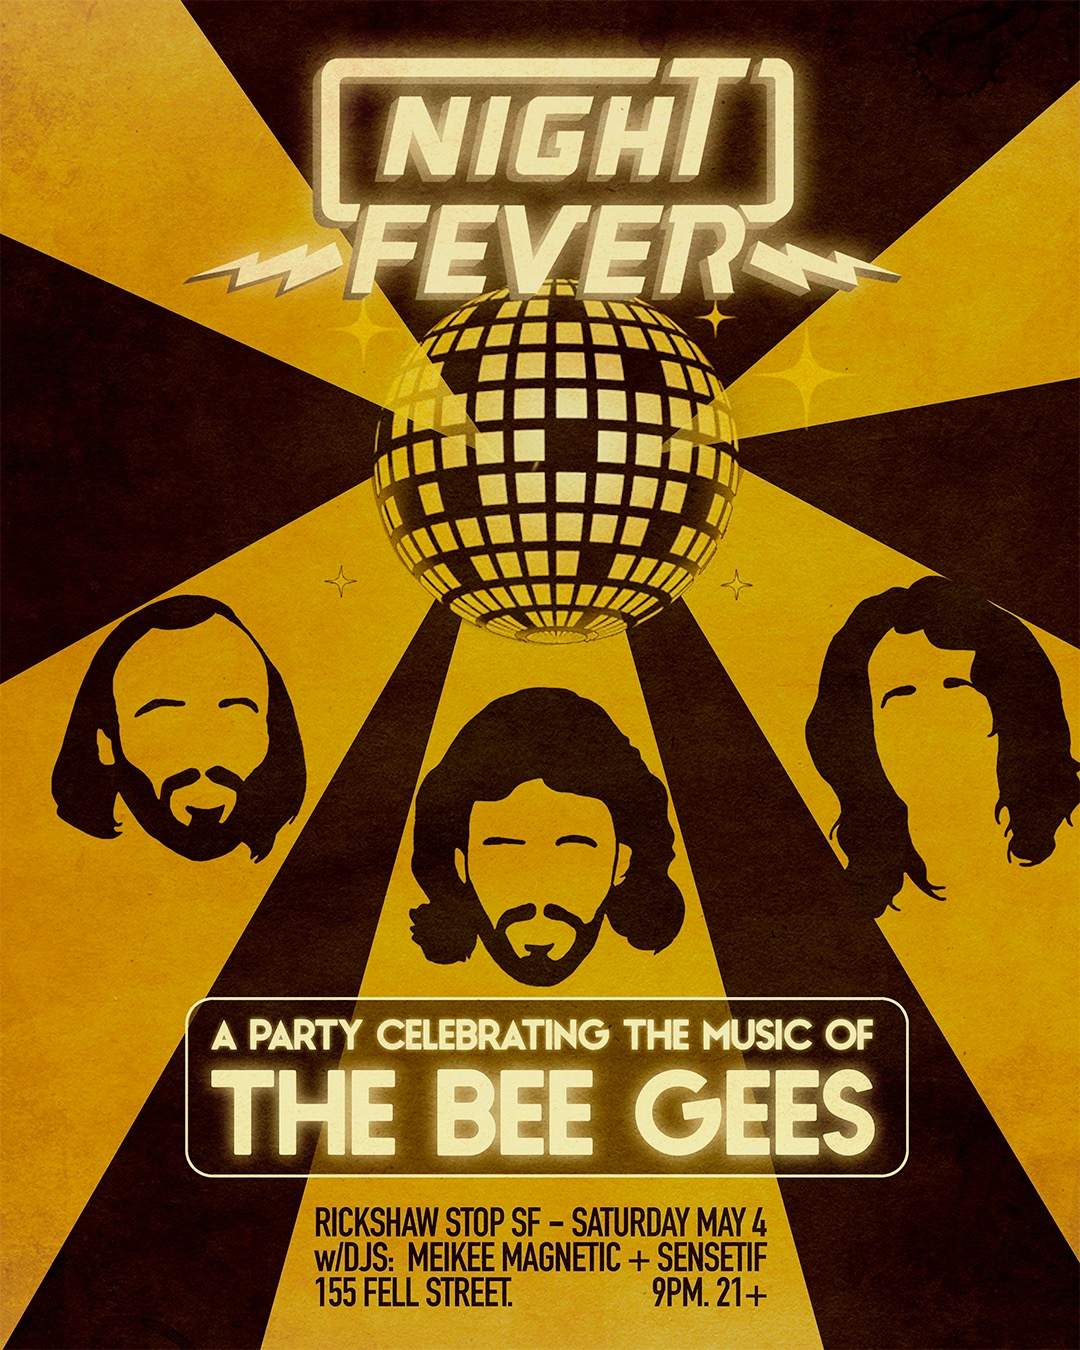 NIGHT FEVER 'A BEE GEES Disco Dance Party' - フライヤー表